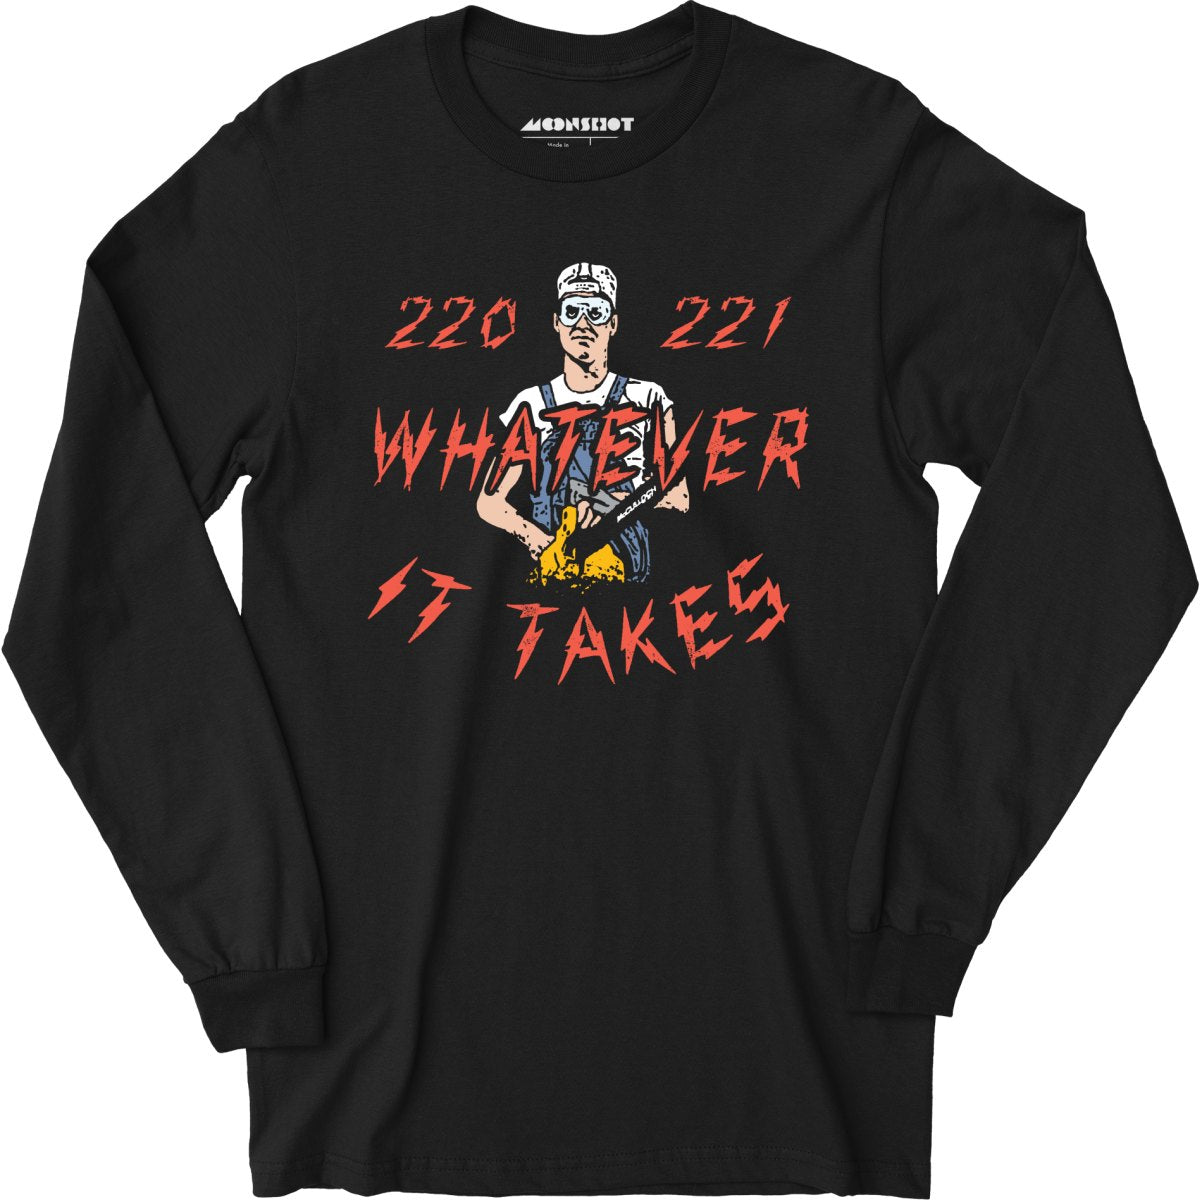 220 221 Whatever it Takes - Long Sleeve T-Shirt